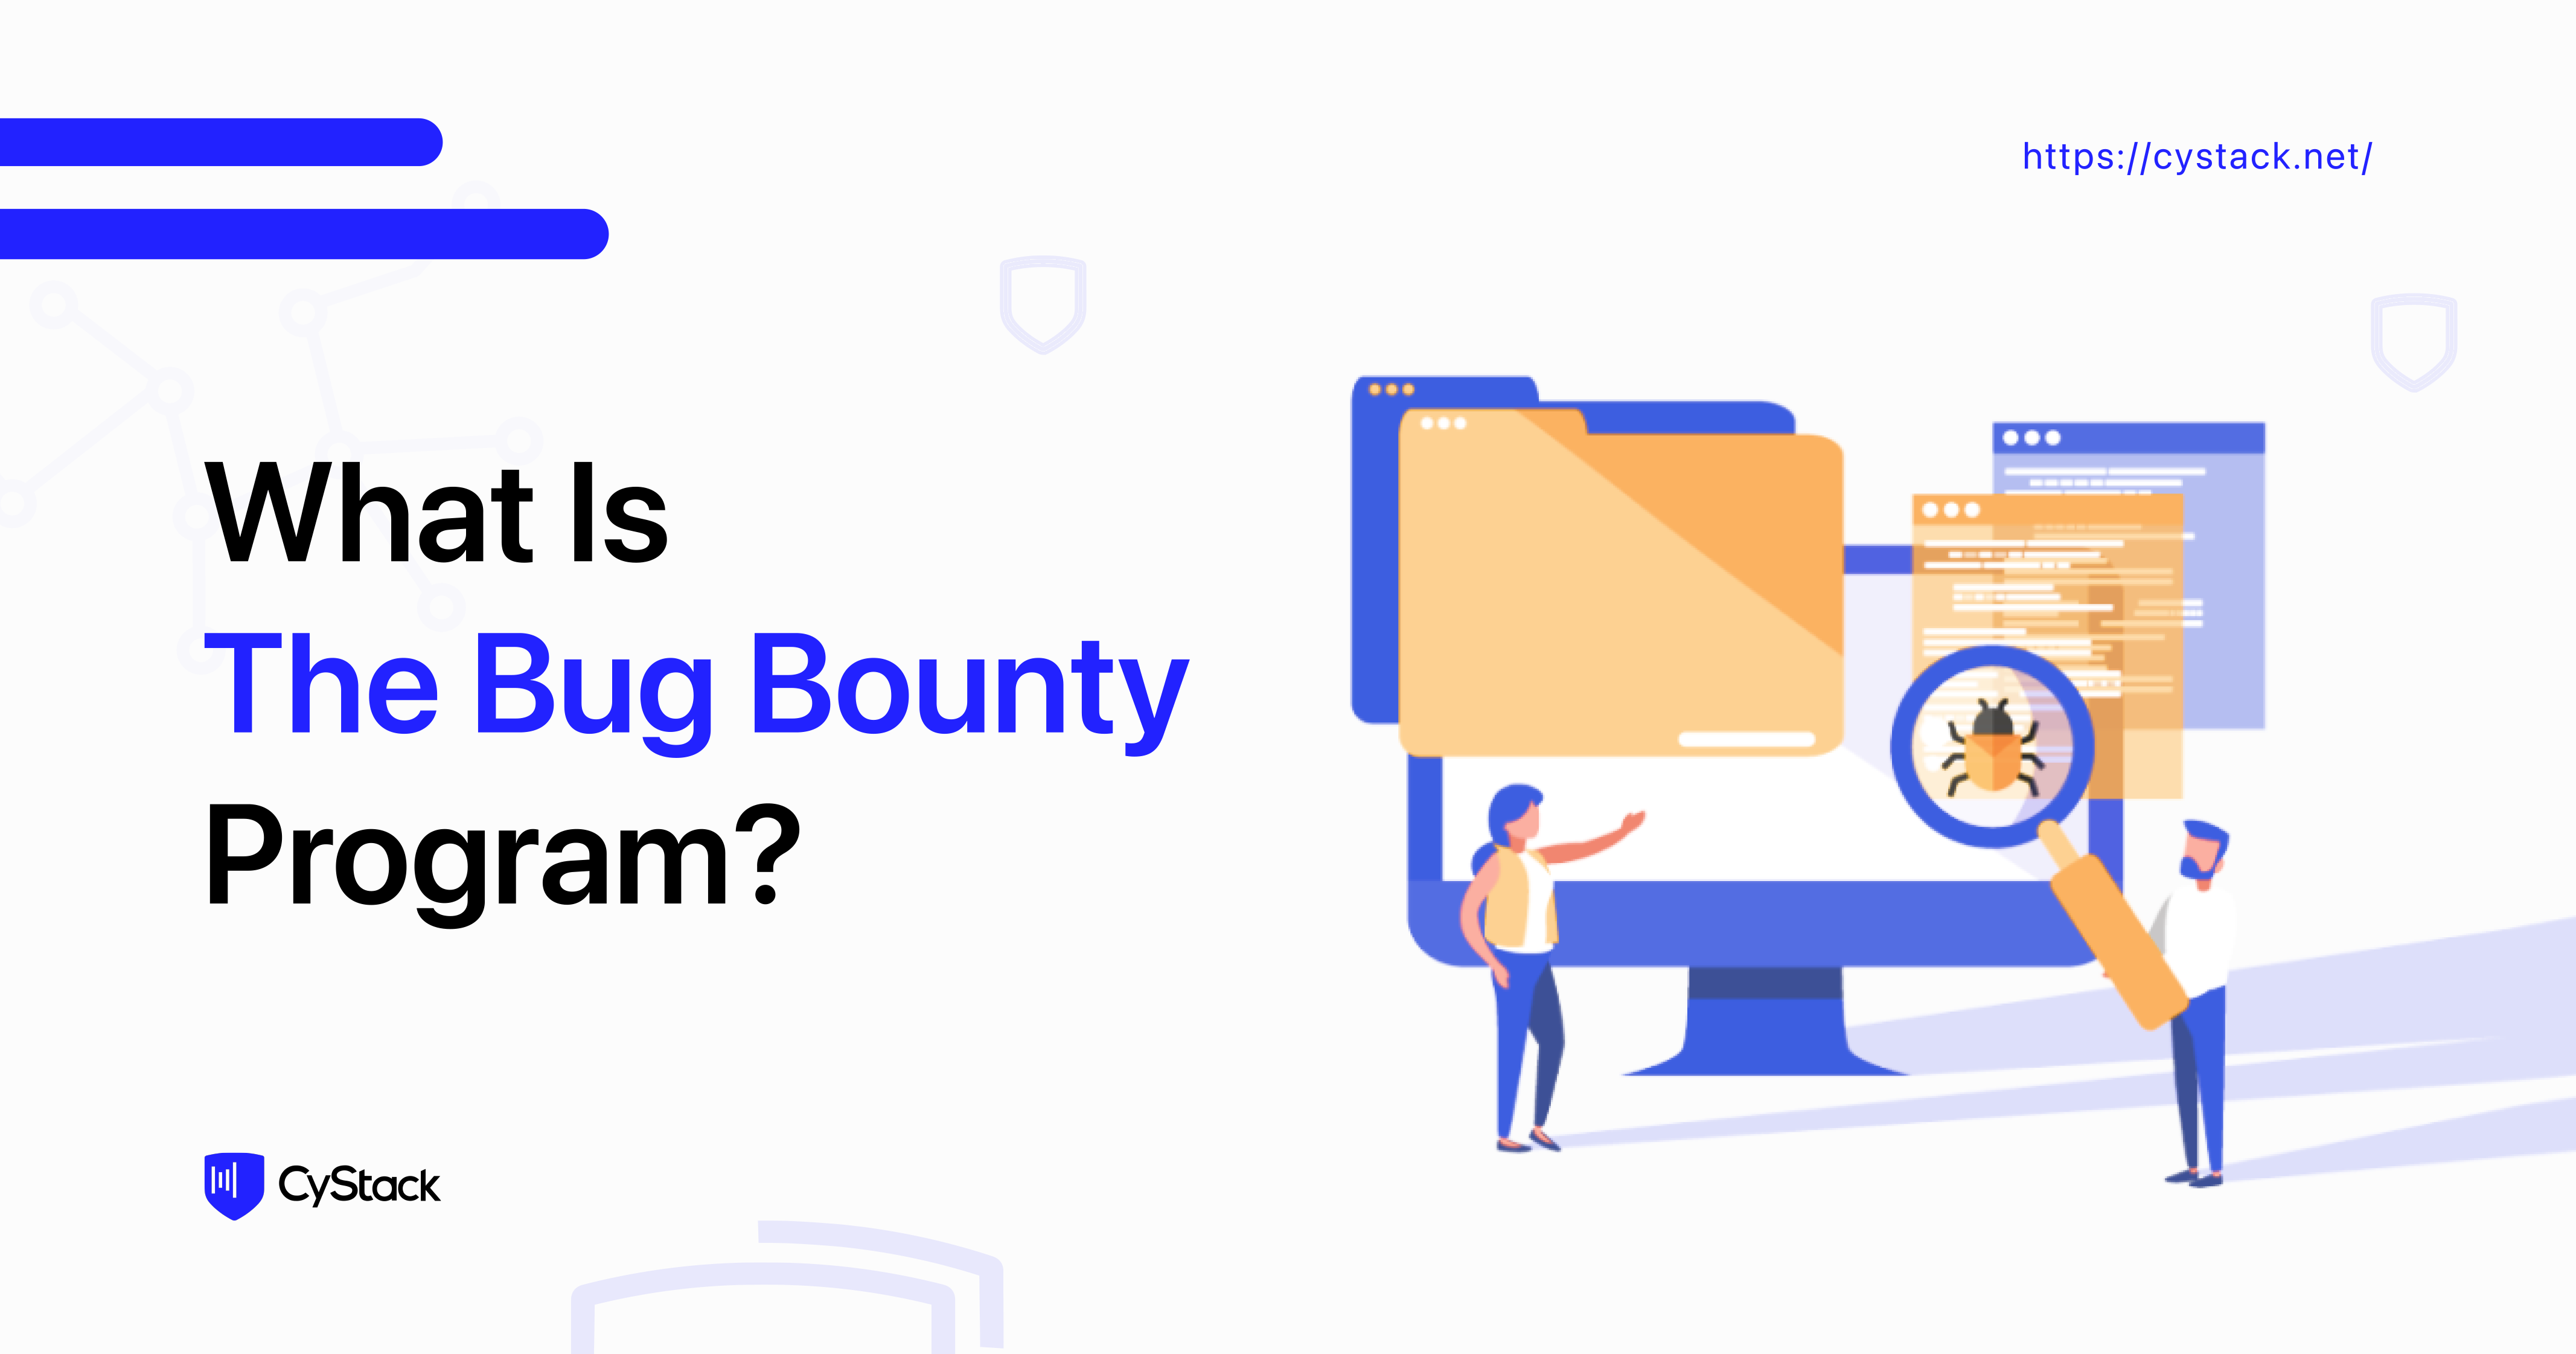 What Is The Bug Bounty Program?